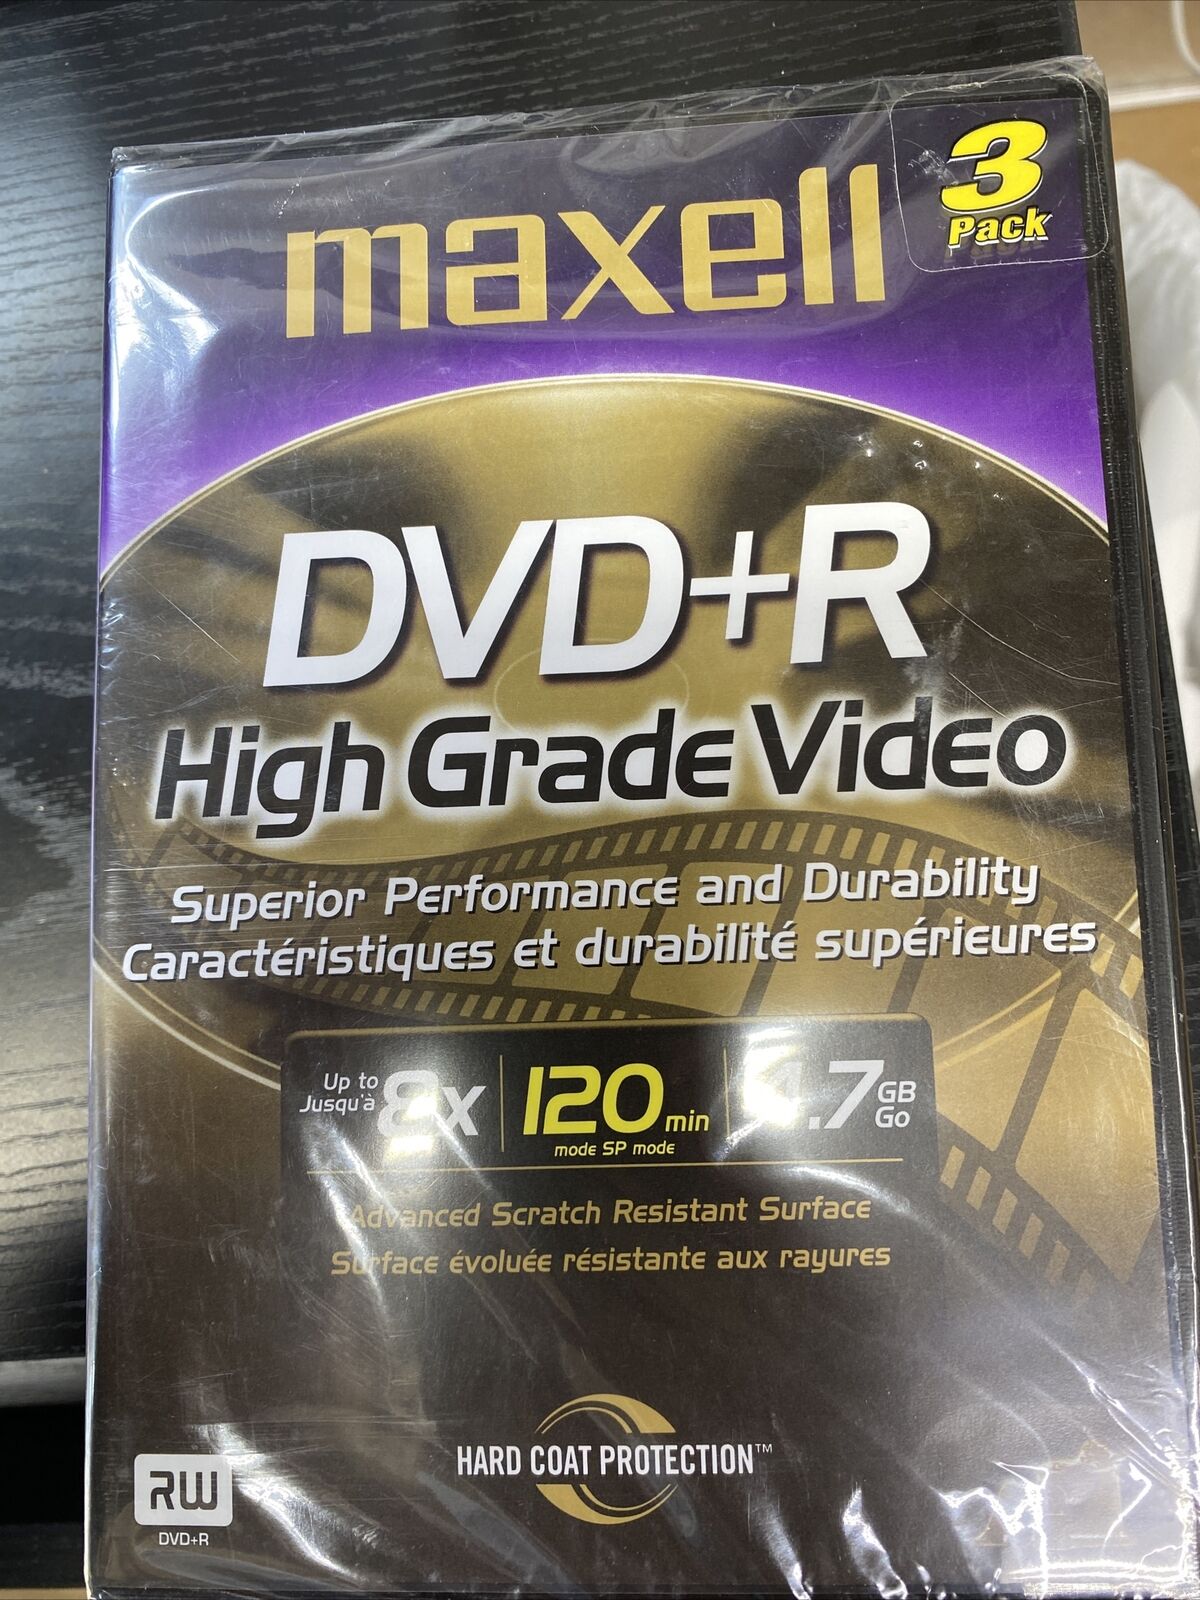 Maxell 3 Pack DVD+R High Grade Video~Advanced Scratch Resistant Surface